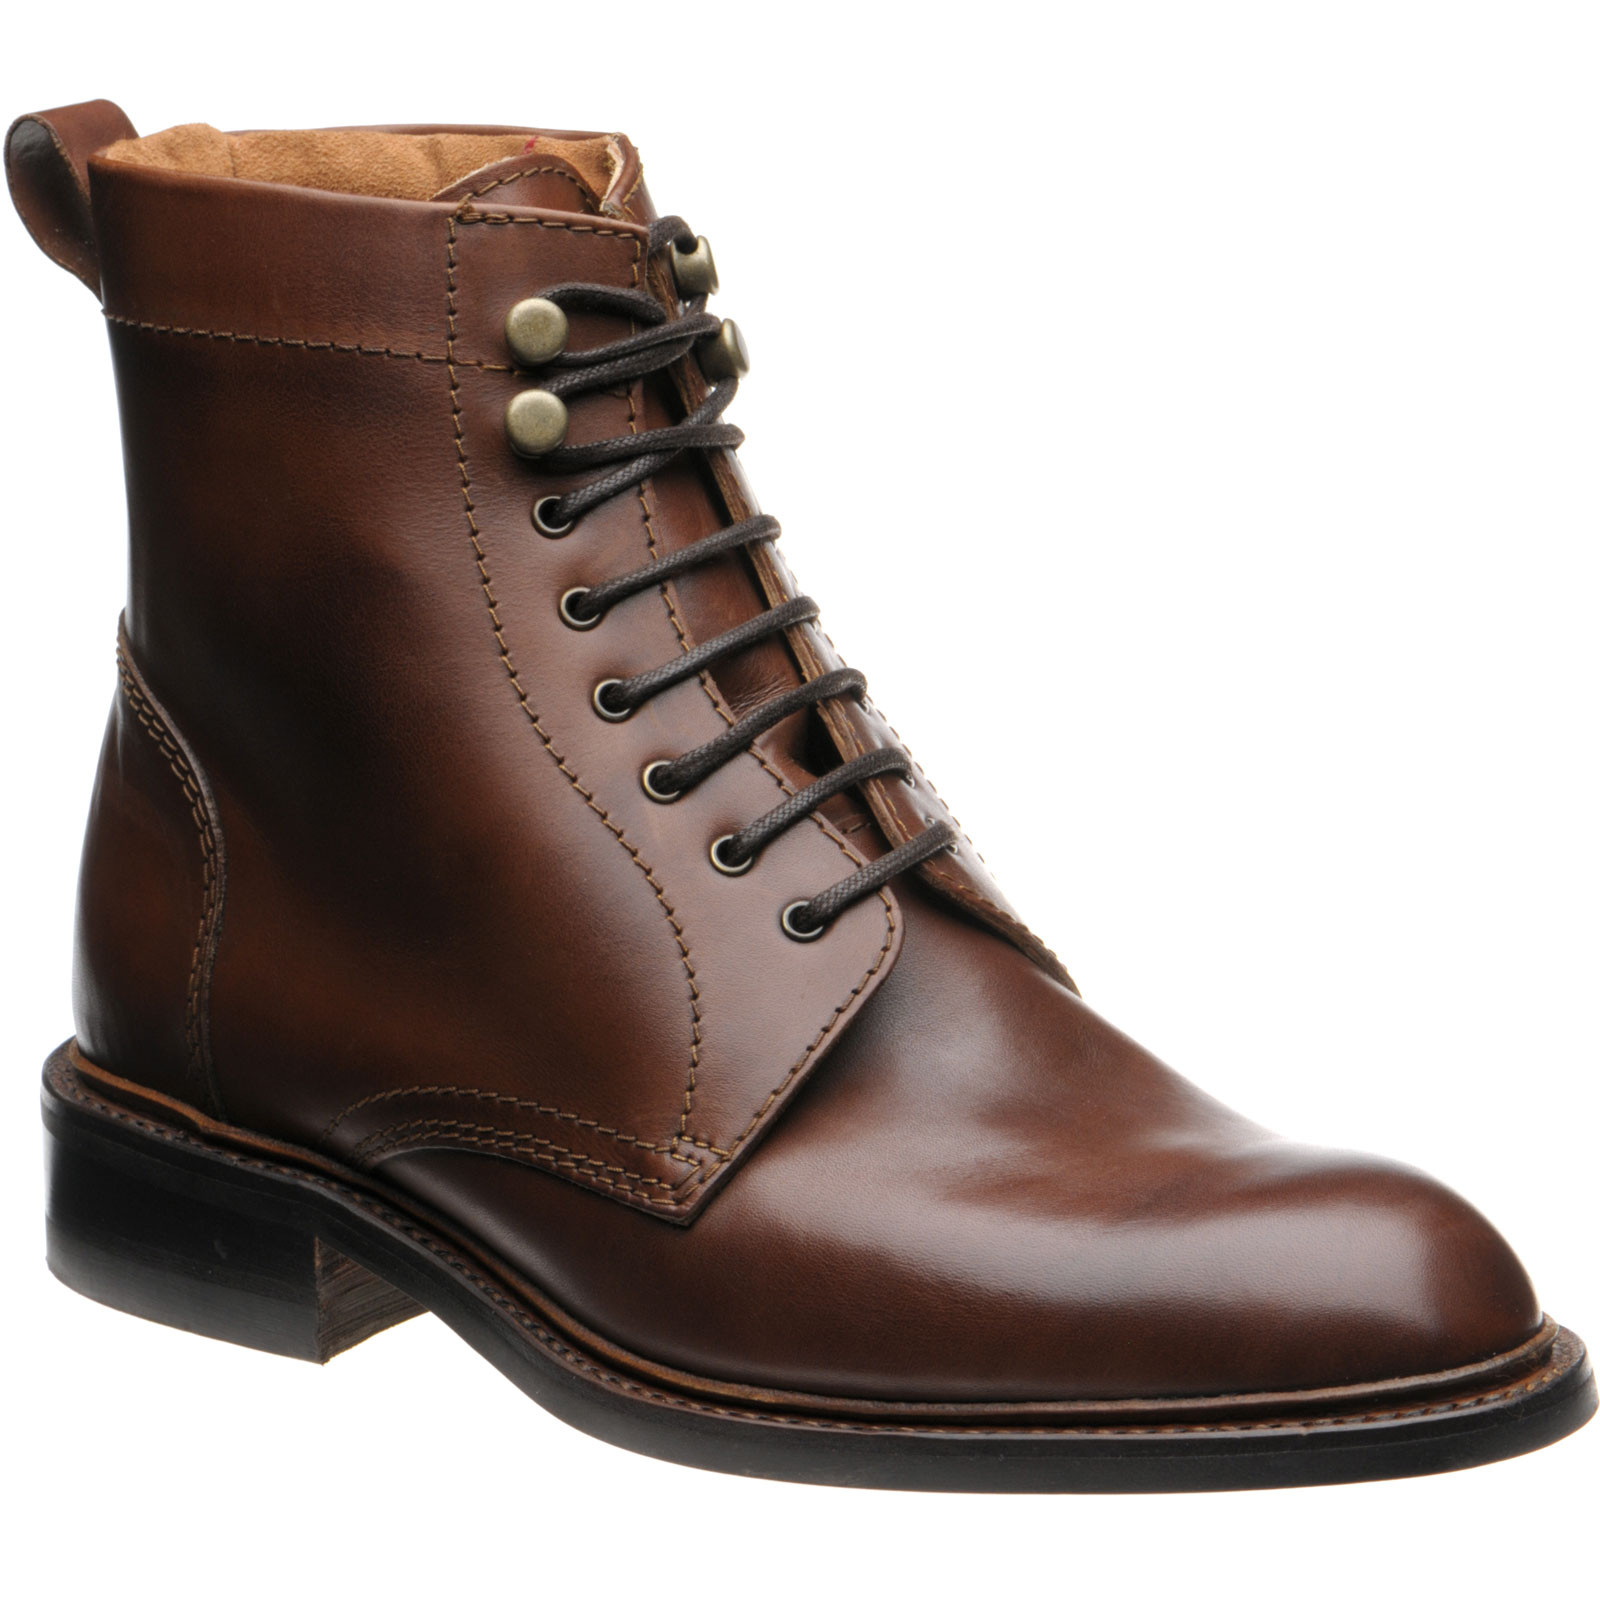 Barker shoes | Barker Factory Seconds | 4465 rubber-soled boots in ...